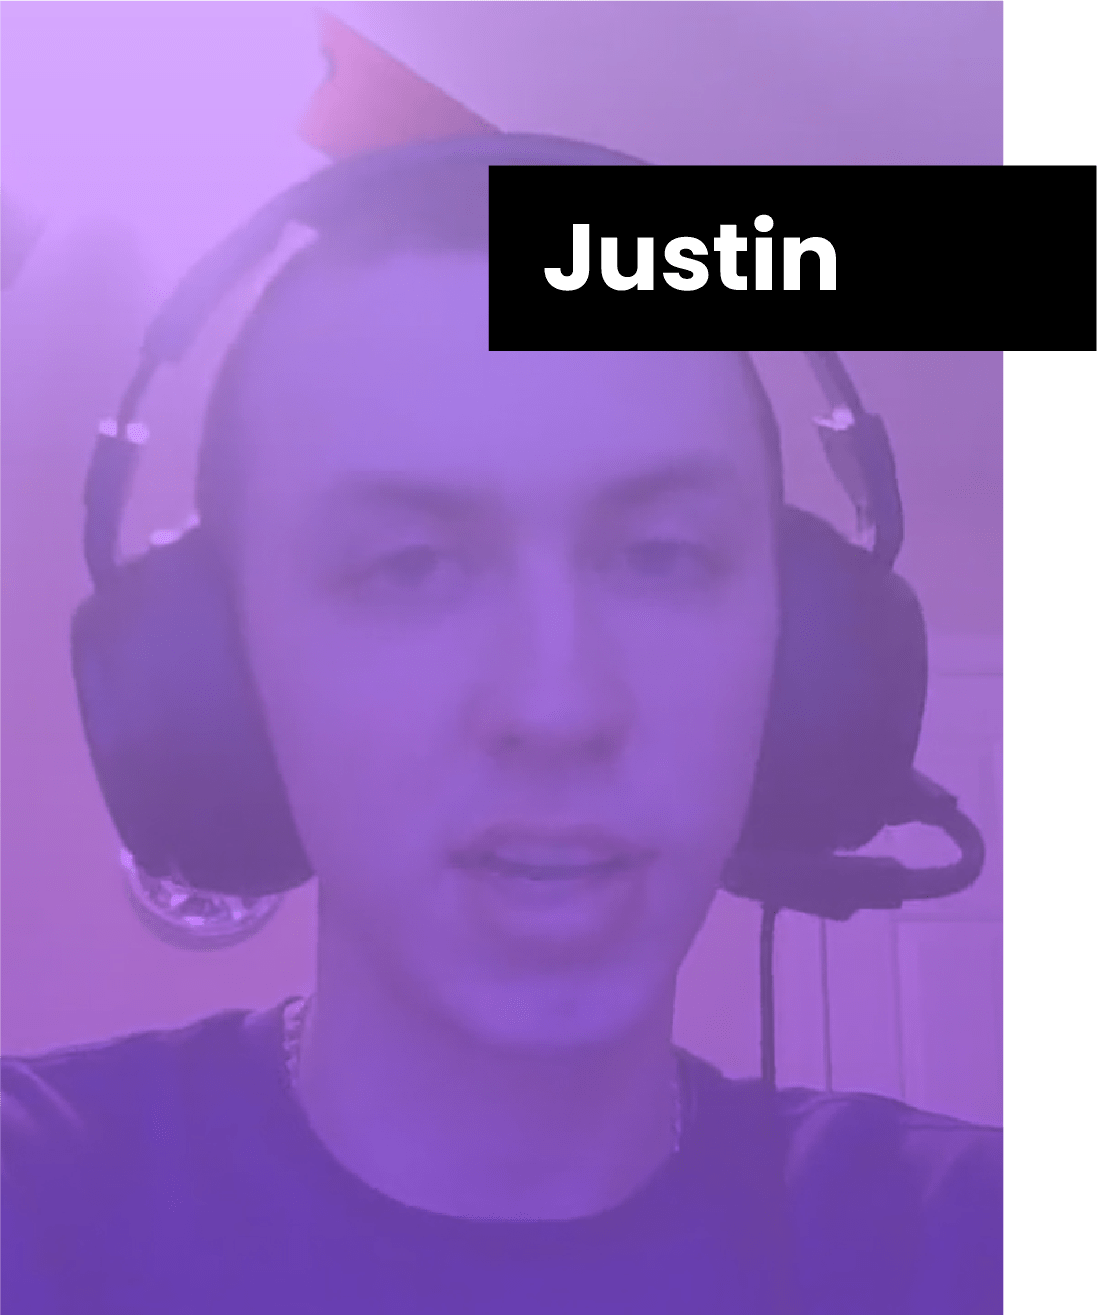 Justin, the engager